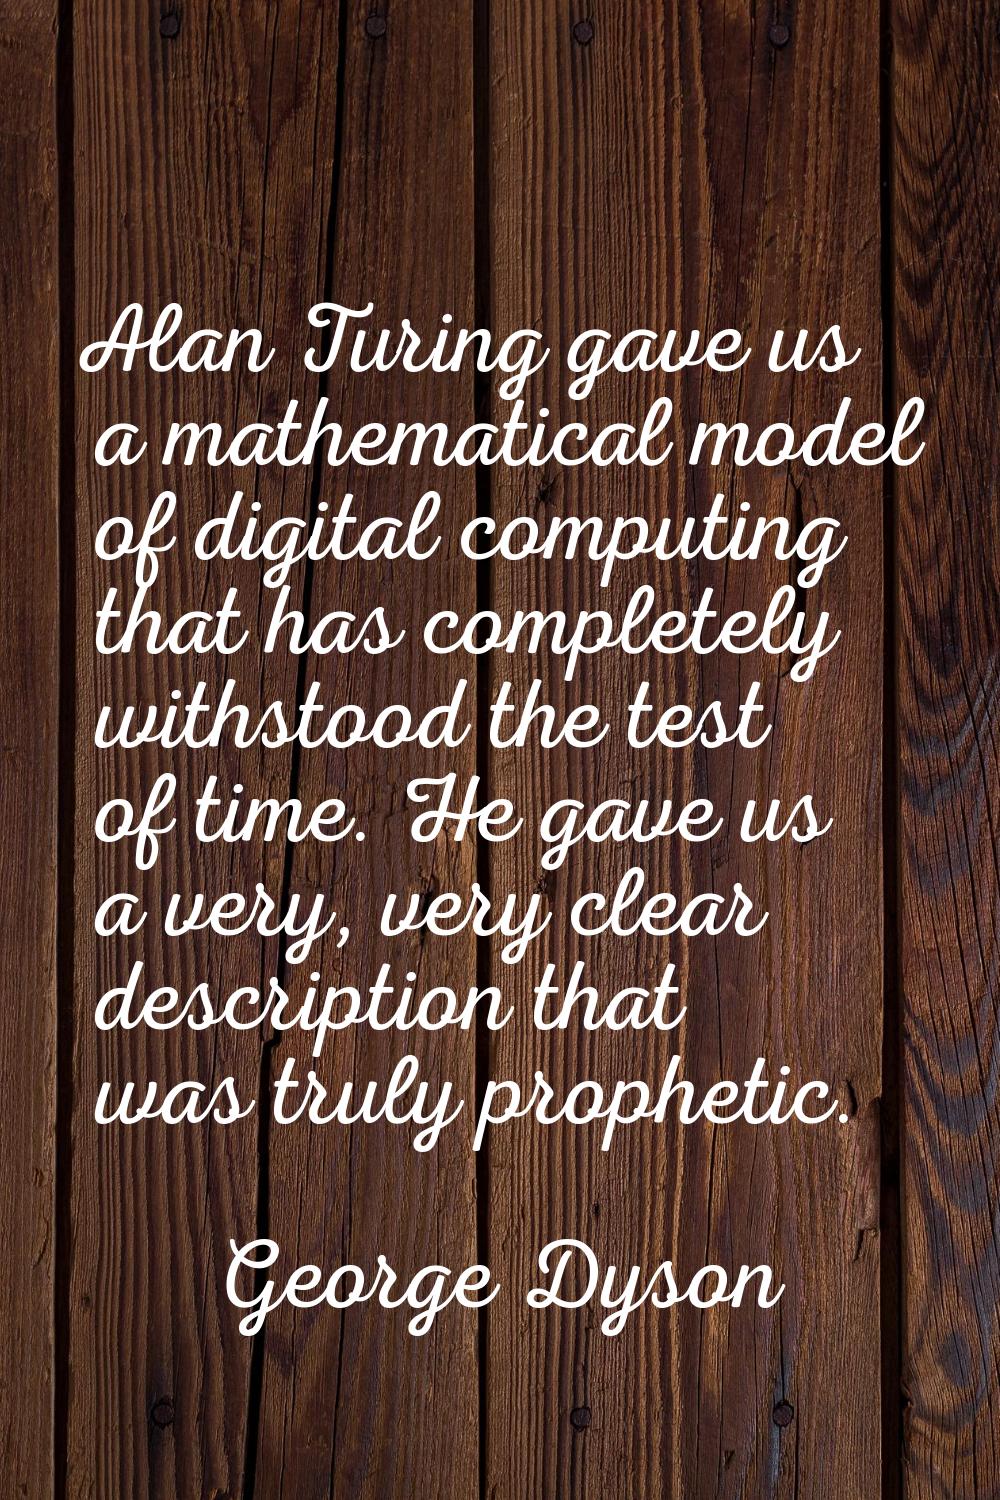 Alan Turing gave us a mathematical model of digital computing that has completely withstood the tes